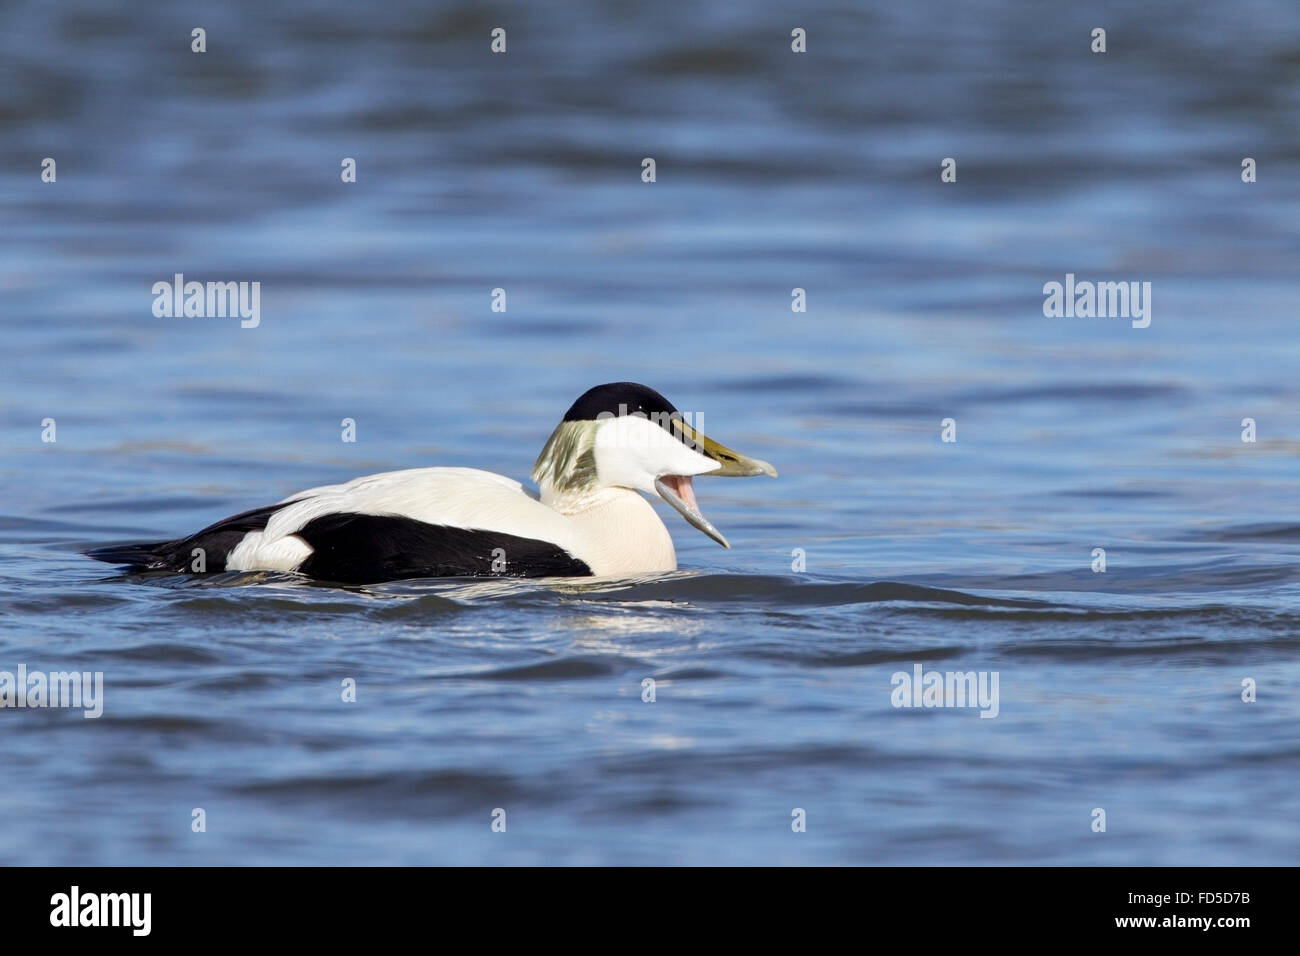 common eider (Somateria mollissima) adult male swimming on sea calling with mouth open, Aberdeenshire, Scotland, UK Stock Photo